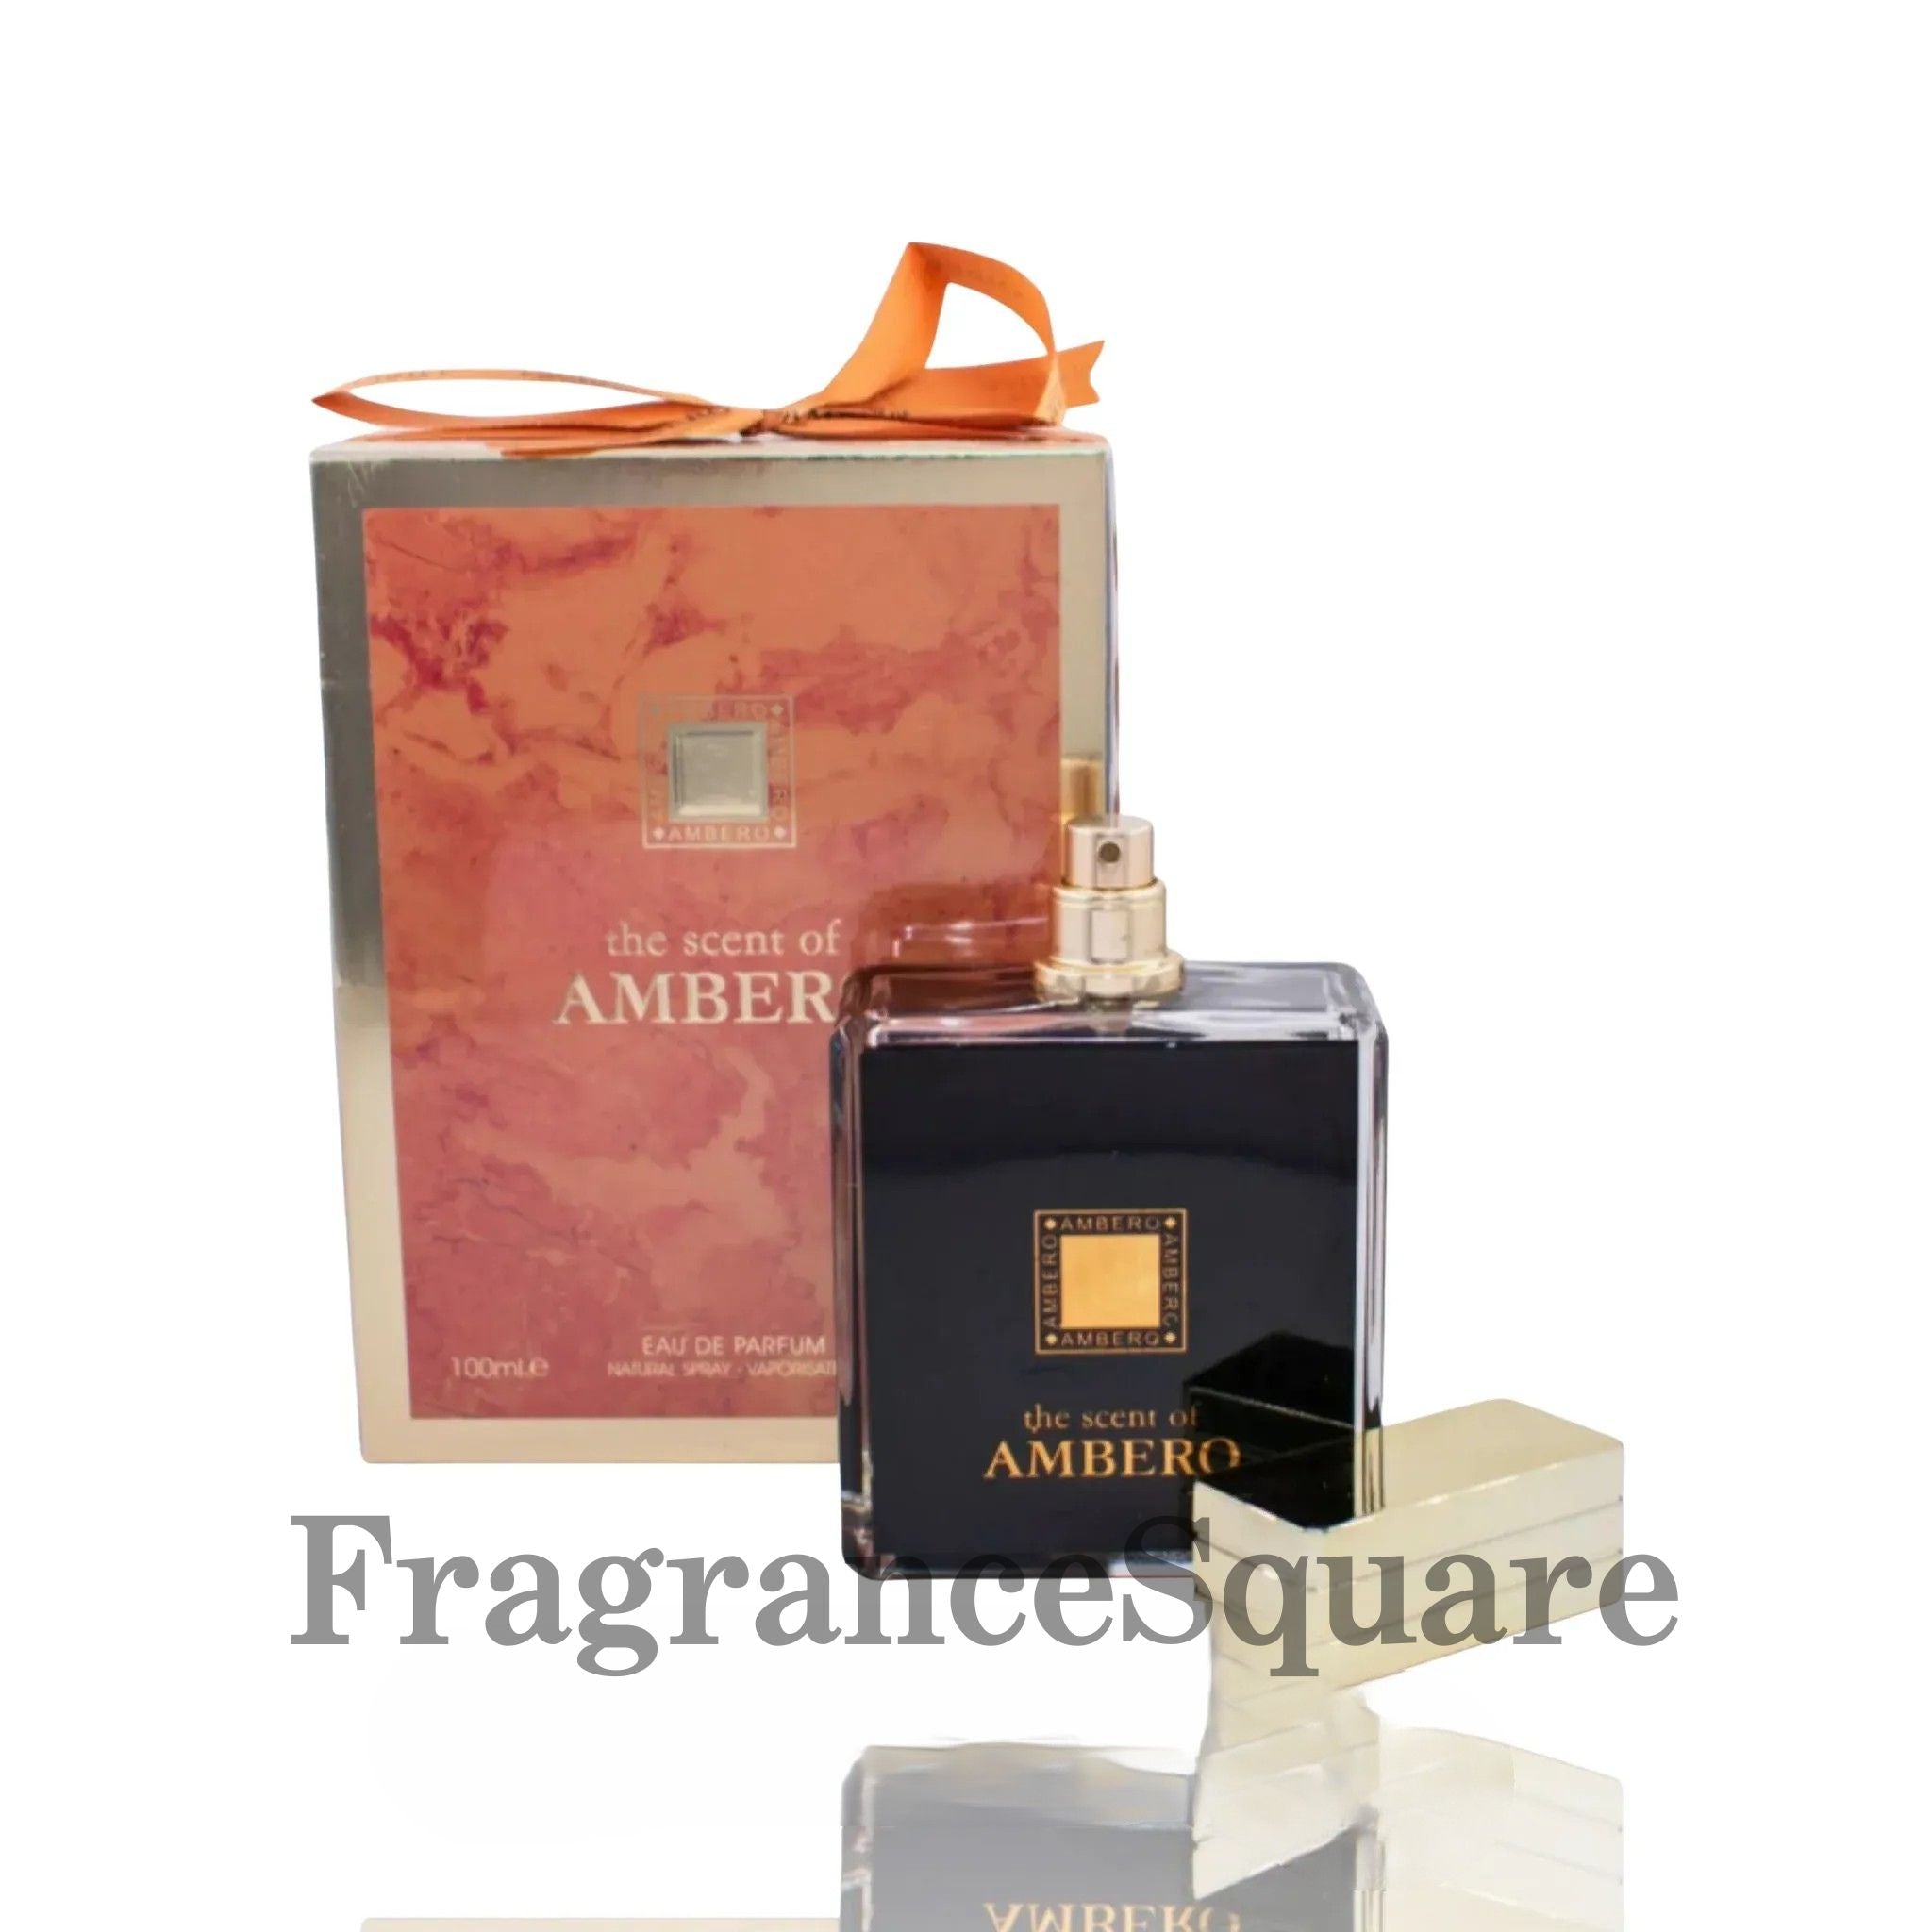 The Scent Of Ambero | Eau De Parfum 100ml | by Fragrance World *Inspired By Le Gemme Ambero*